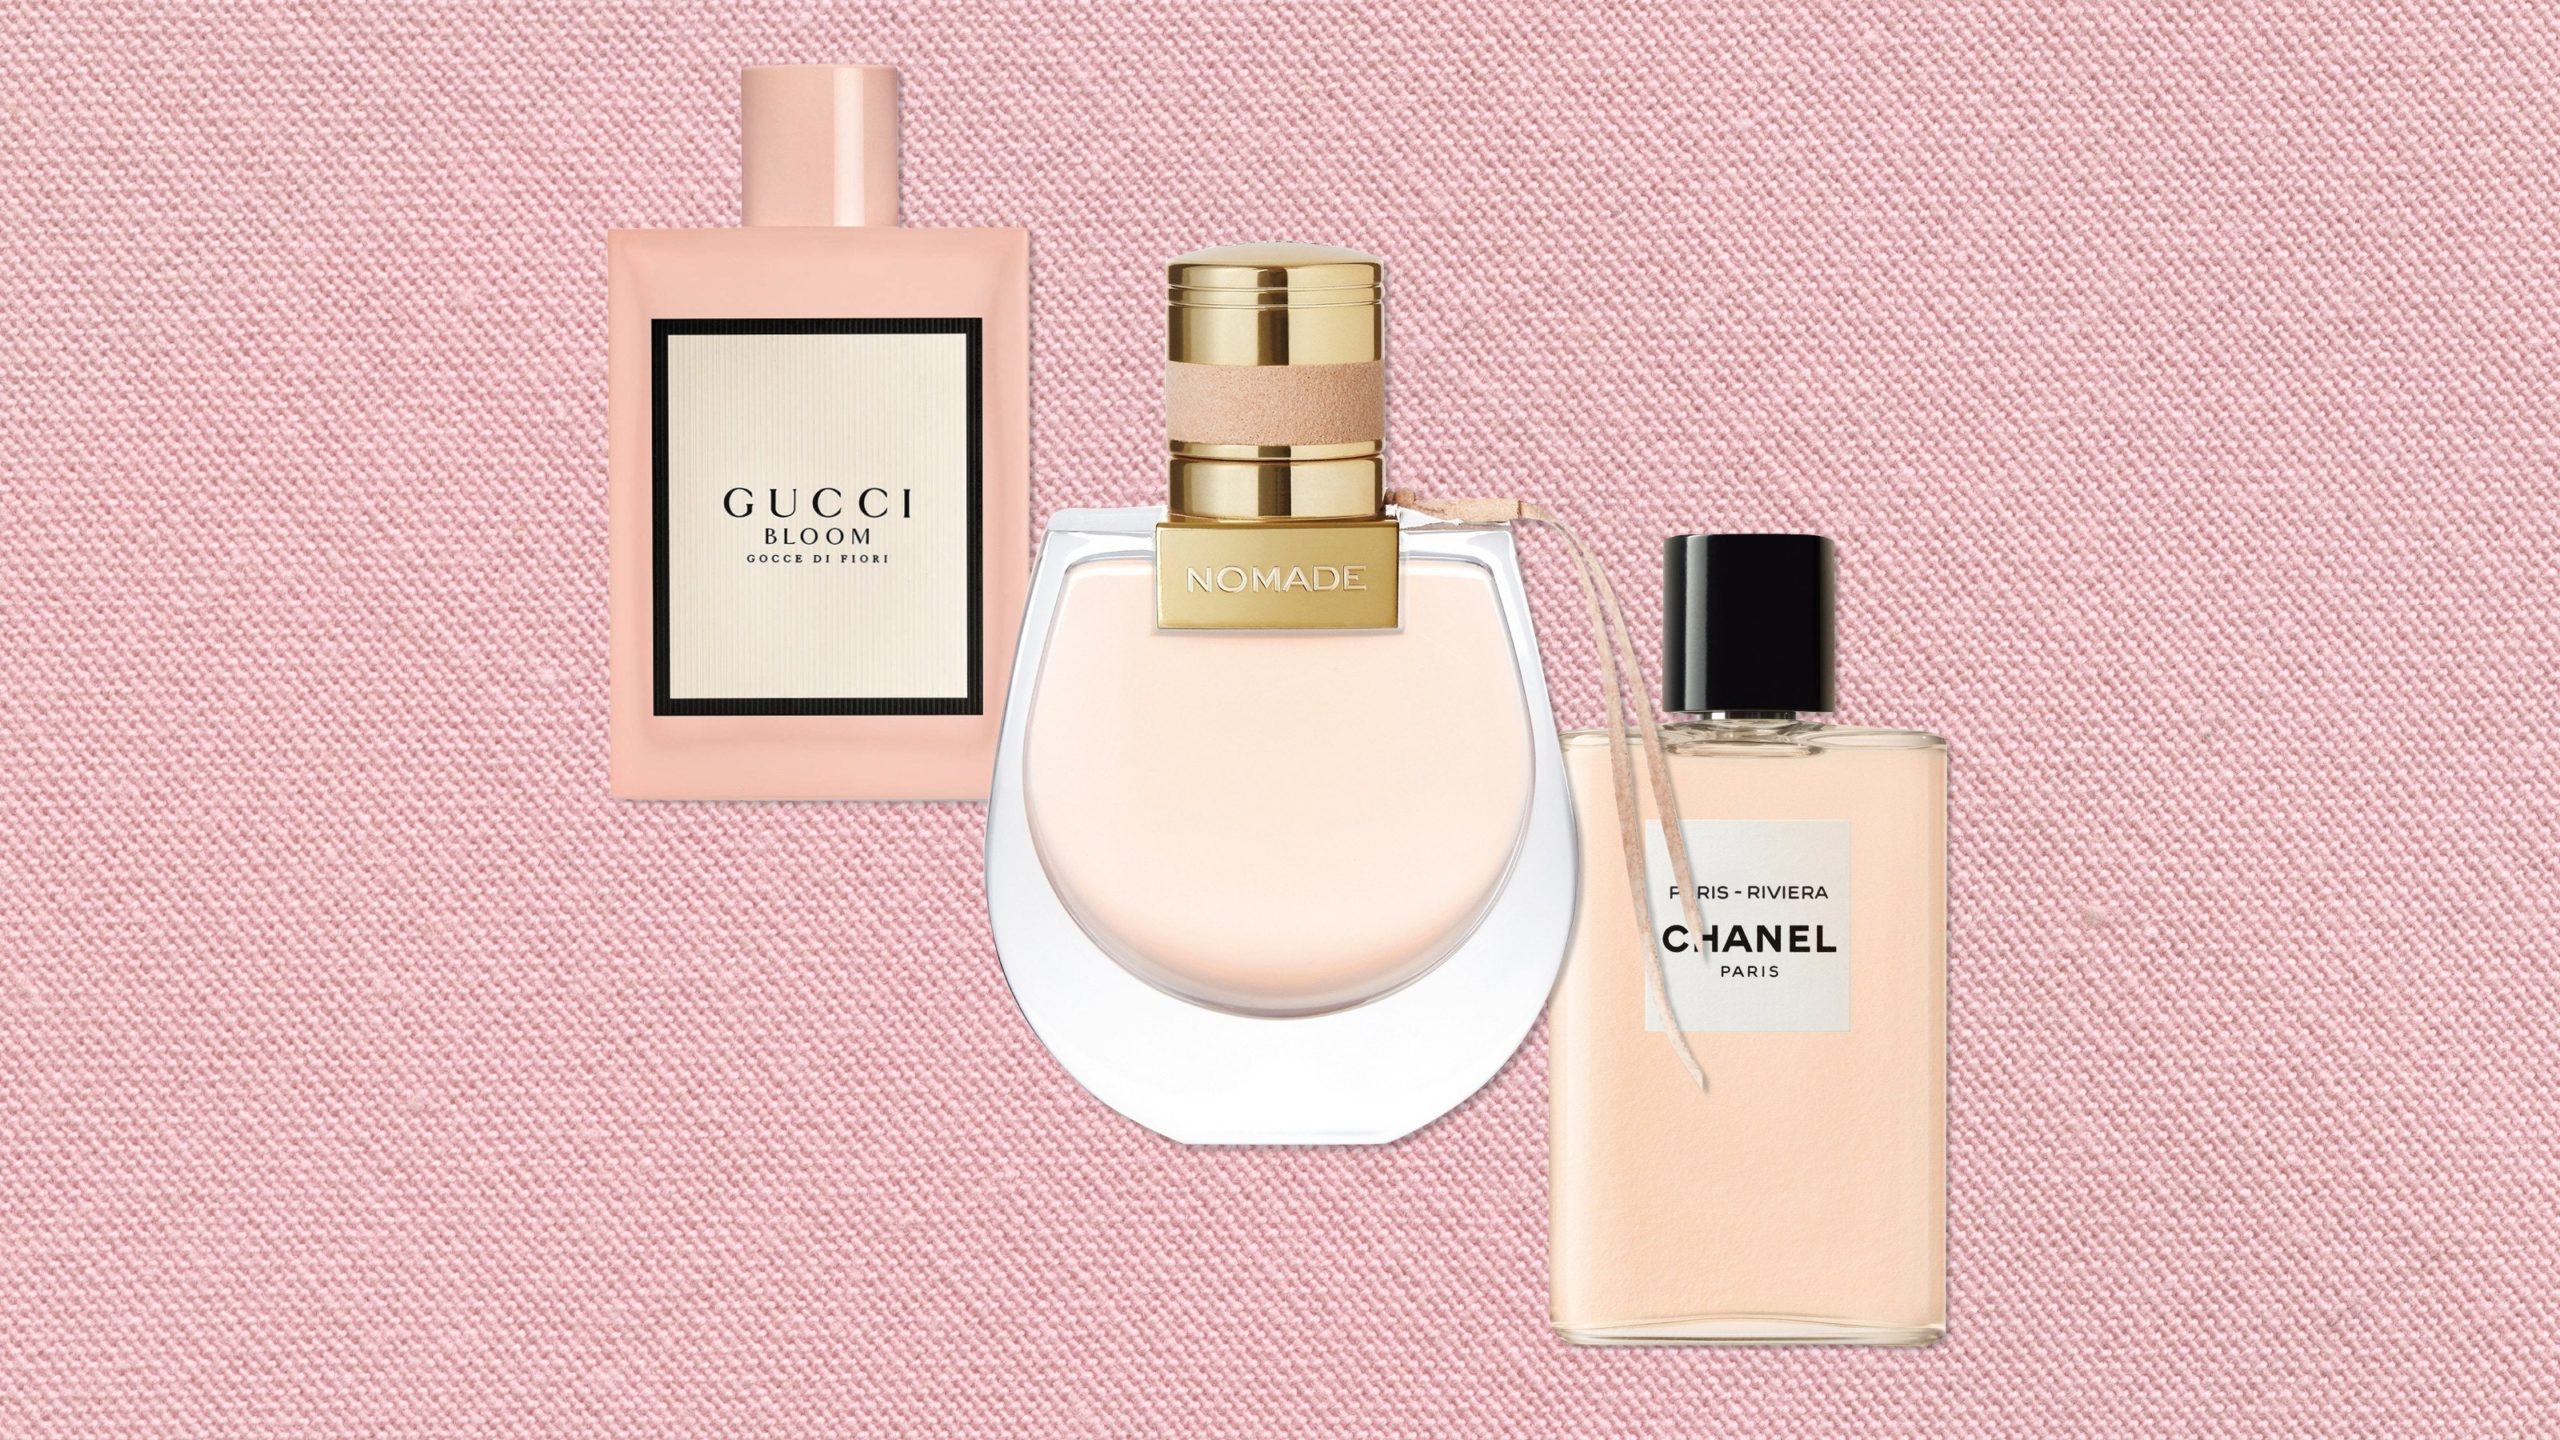 The most inconspicuous scents for summer